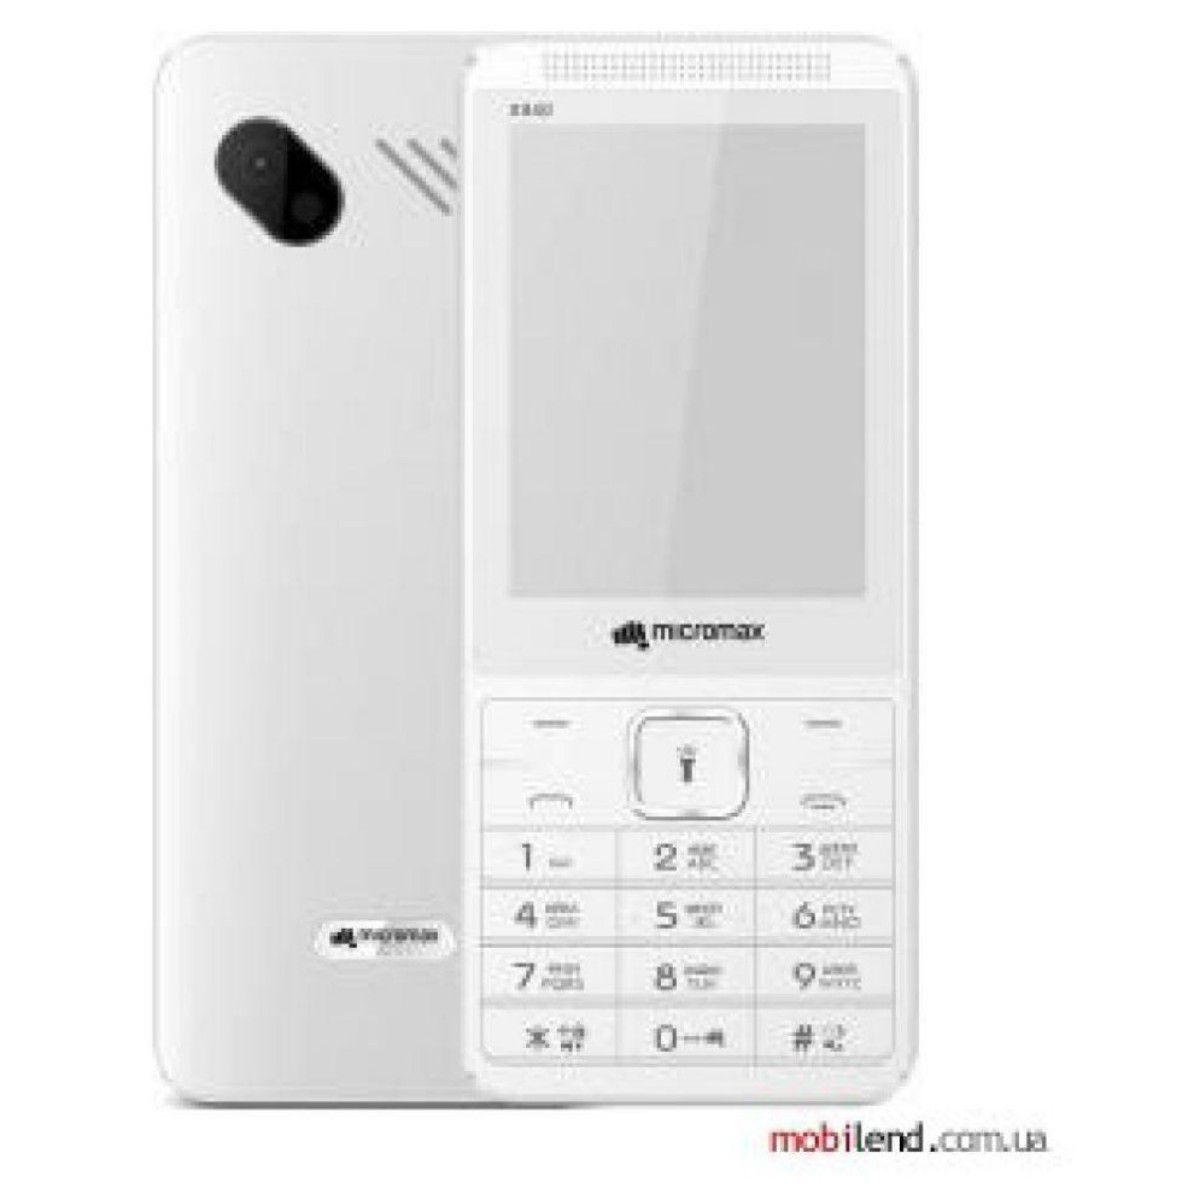 Micromax X940 White Feature Phone Online At Low Prices Snapdeal India